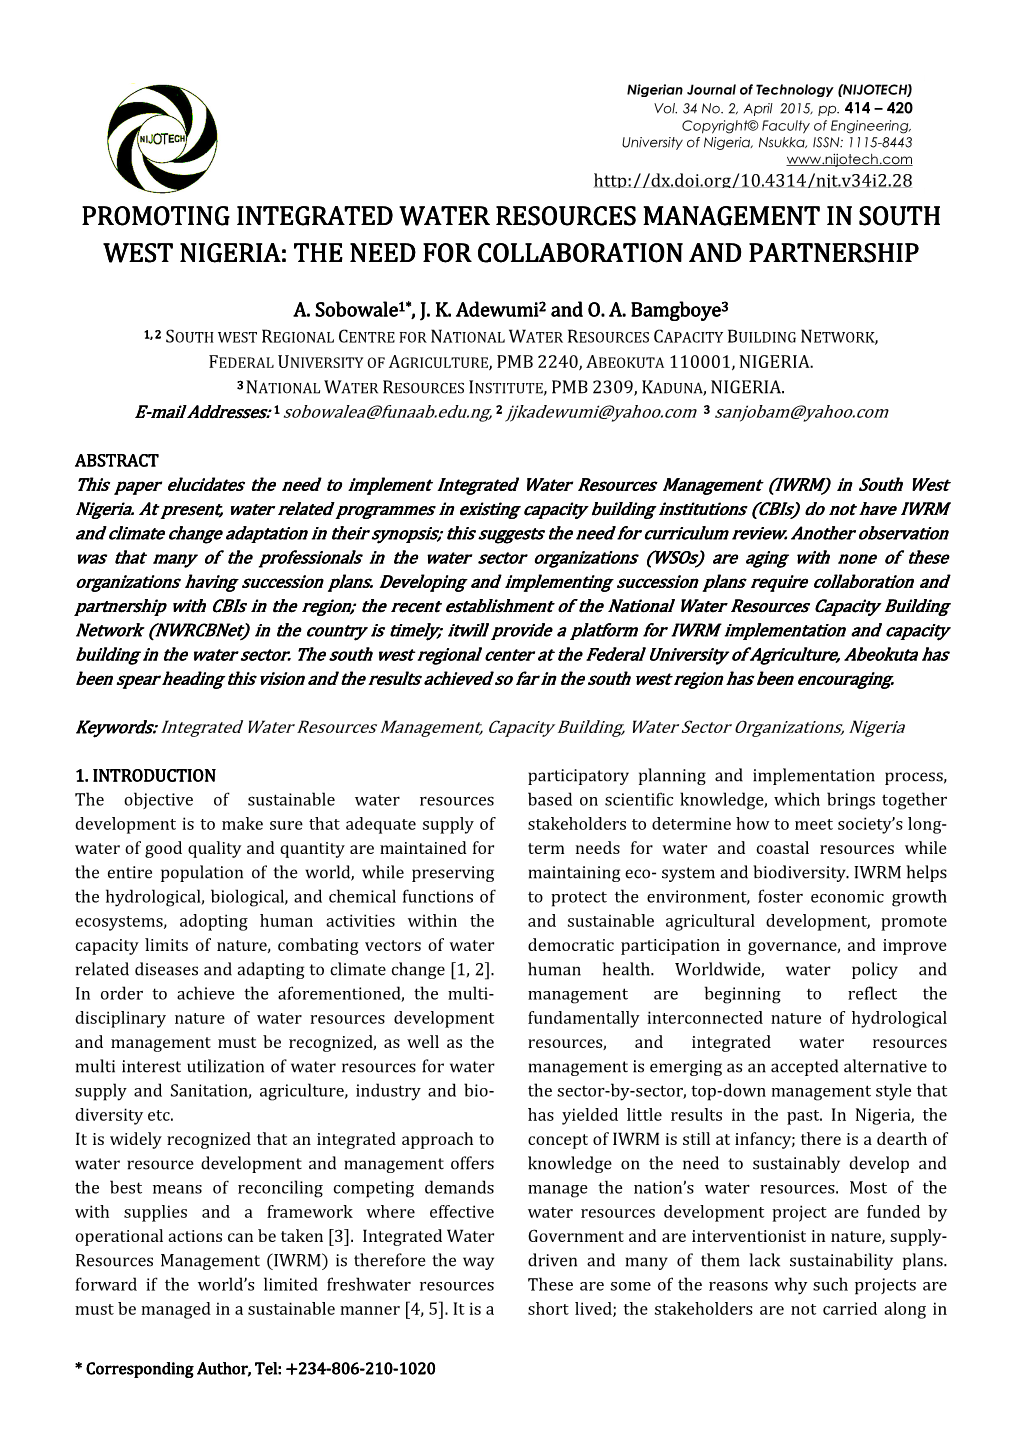 Promoting Integrated Water Resources Management in South West Nigeria: the Need for Collaboration and Partnershippartnership